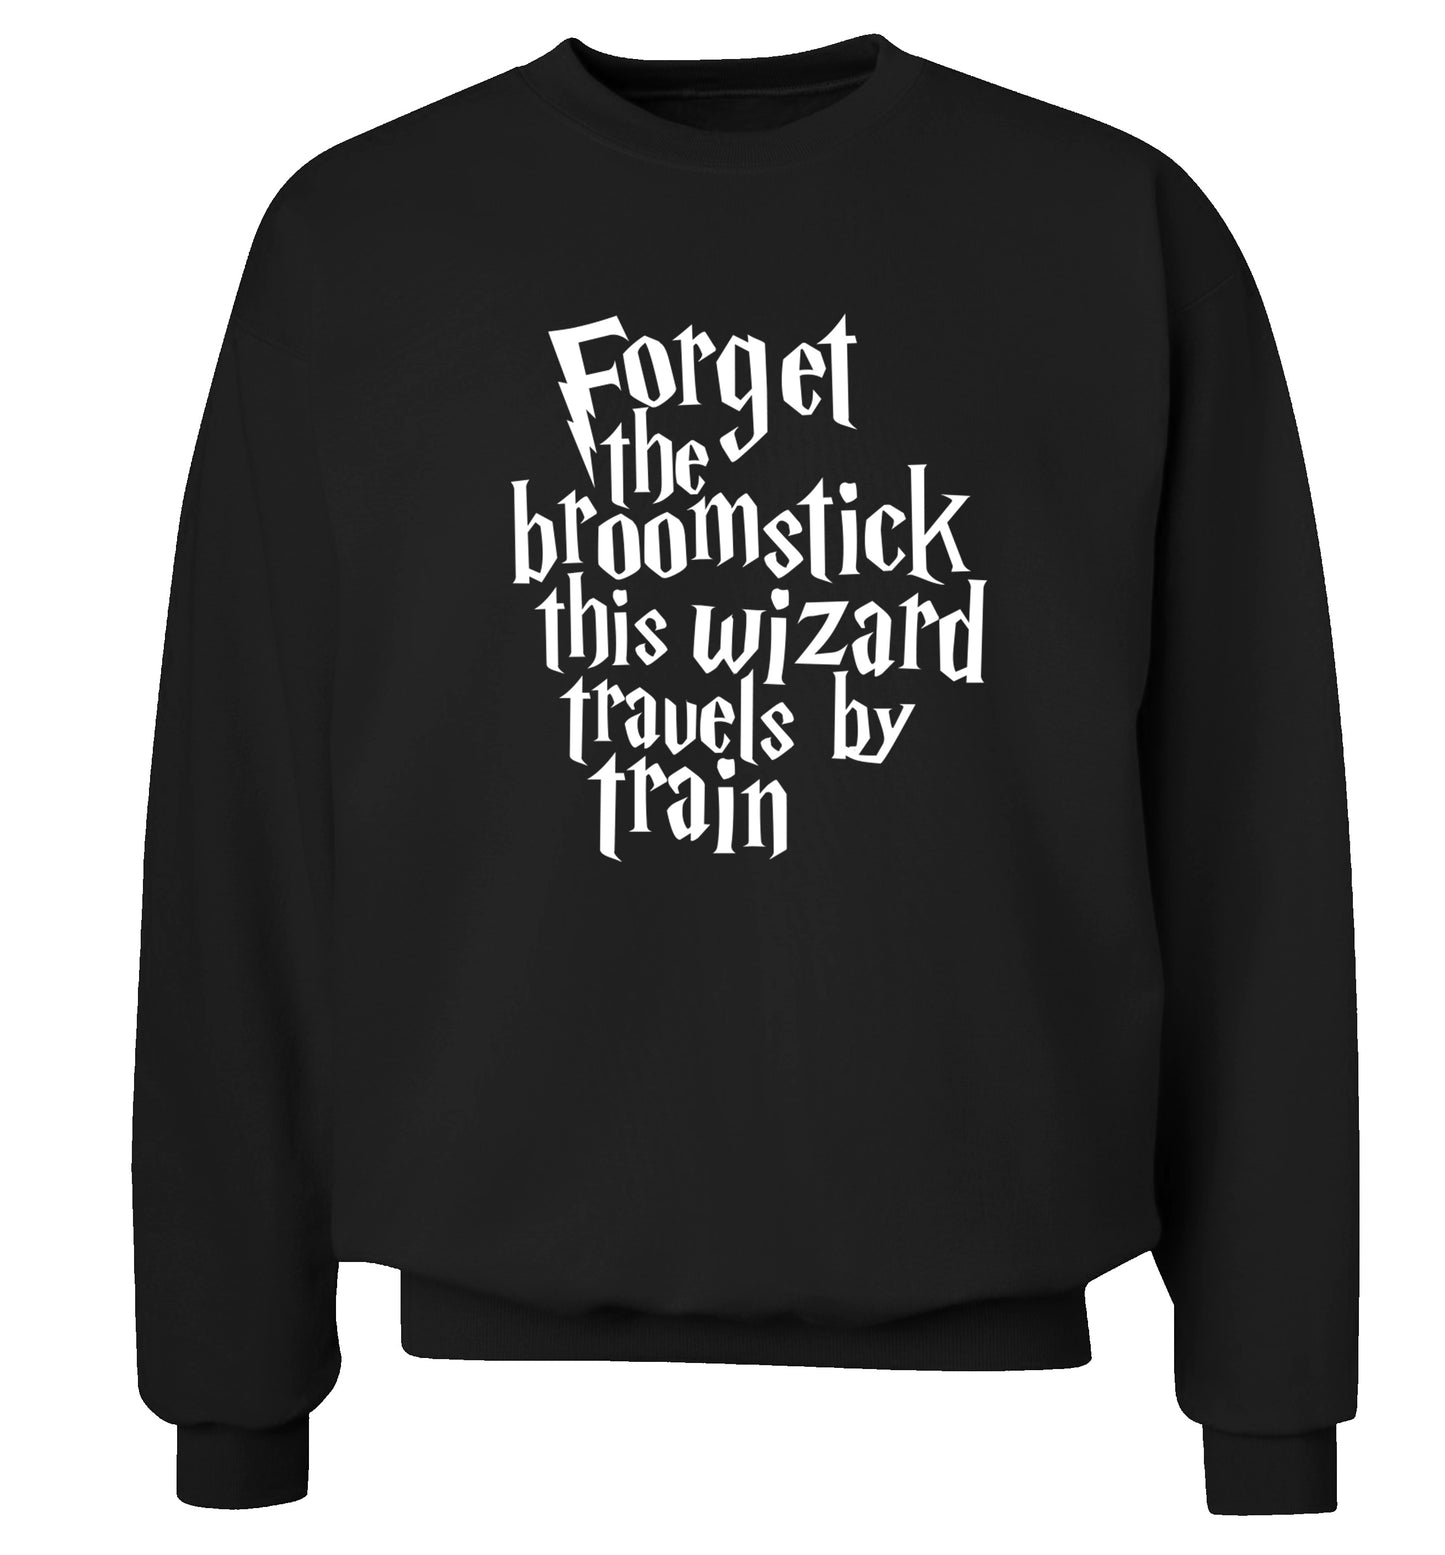 Forget the broomstick this wizard travels by train Adult's unisexblack Sweater 2XL